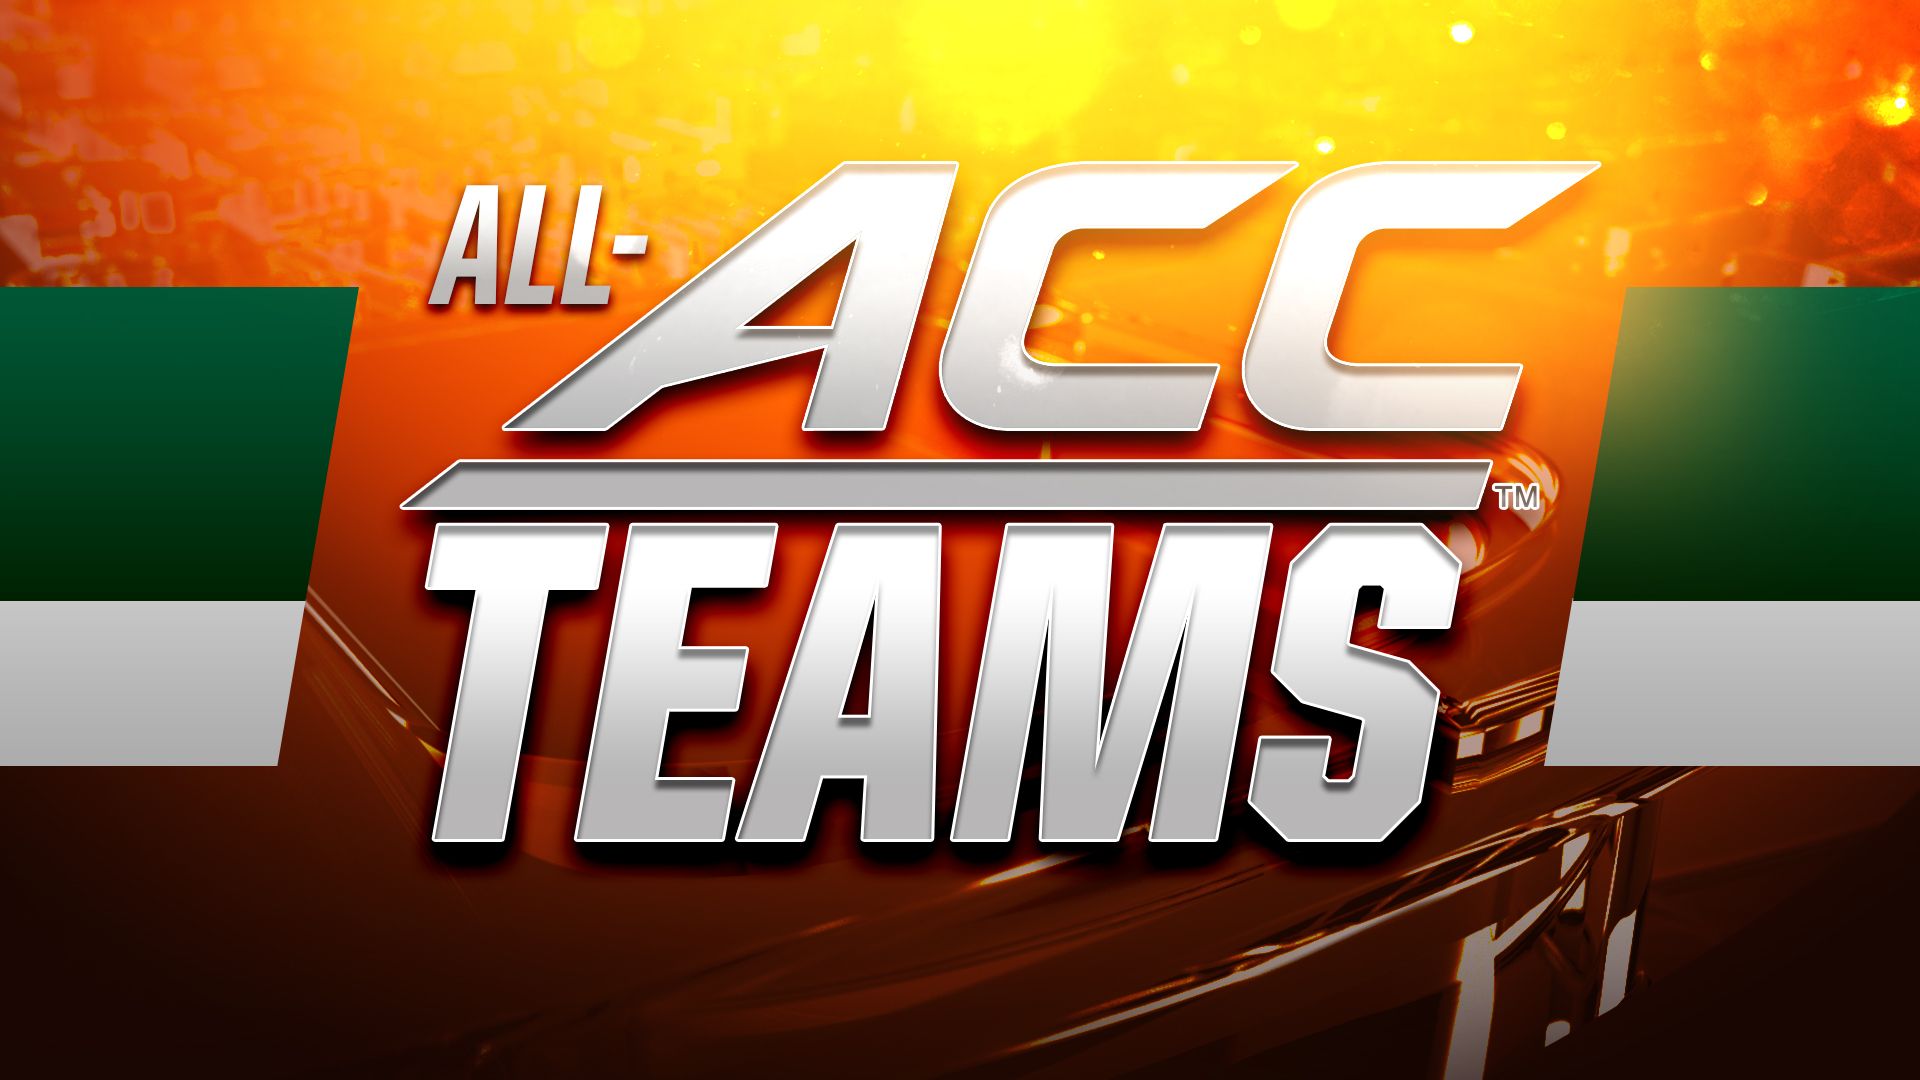 16 Hurricanes Earn All-ACC Recognition